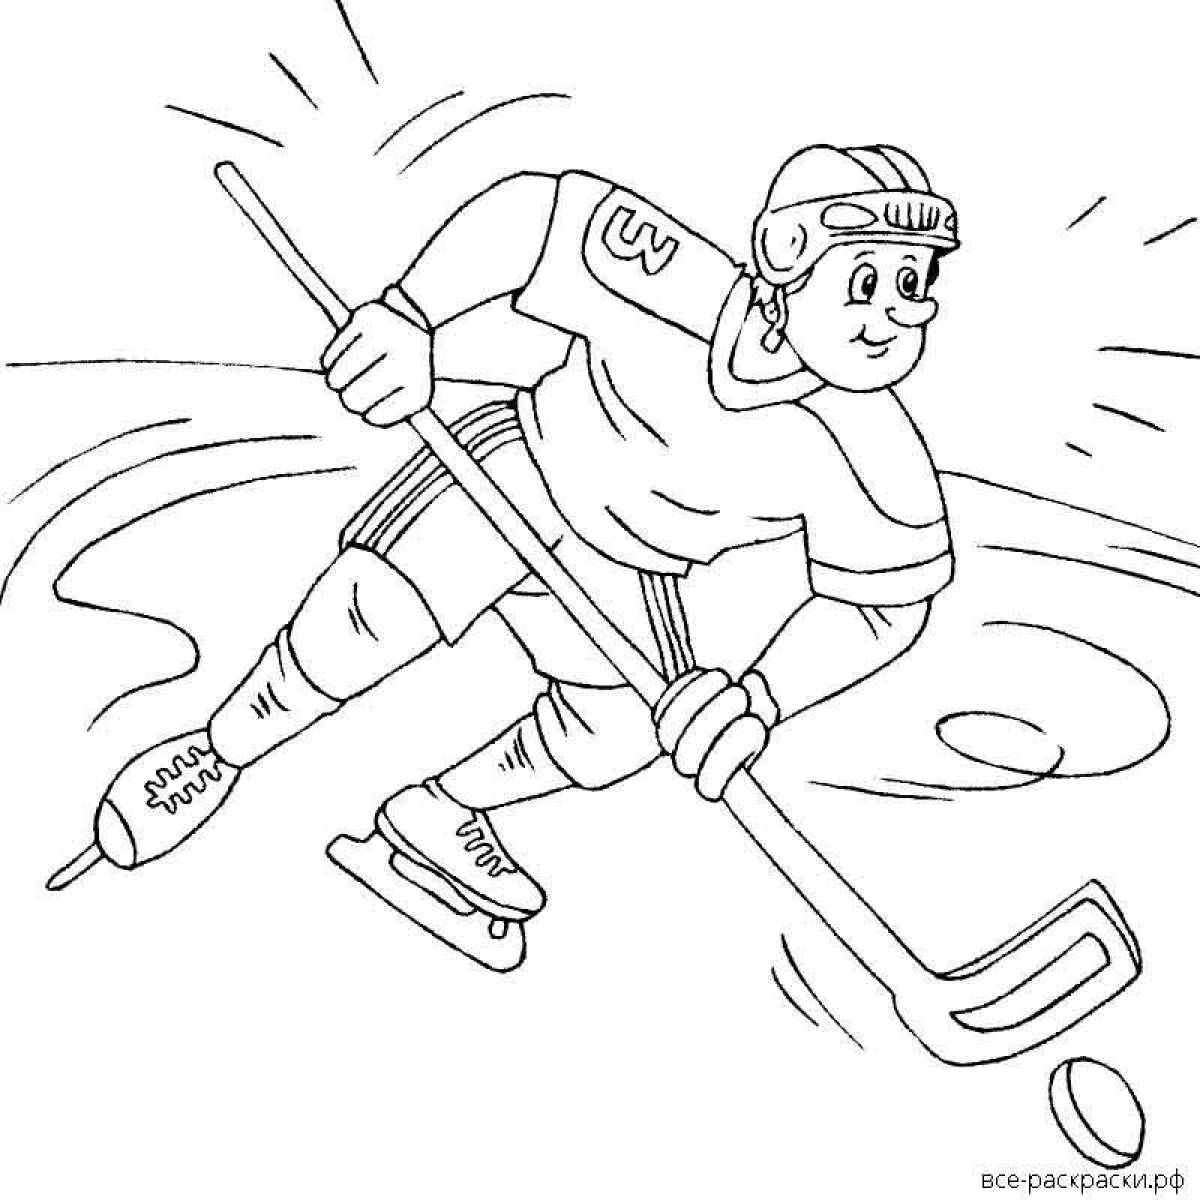 Amazing coloring pages of hockey players for kids